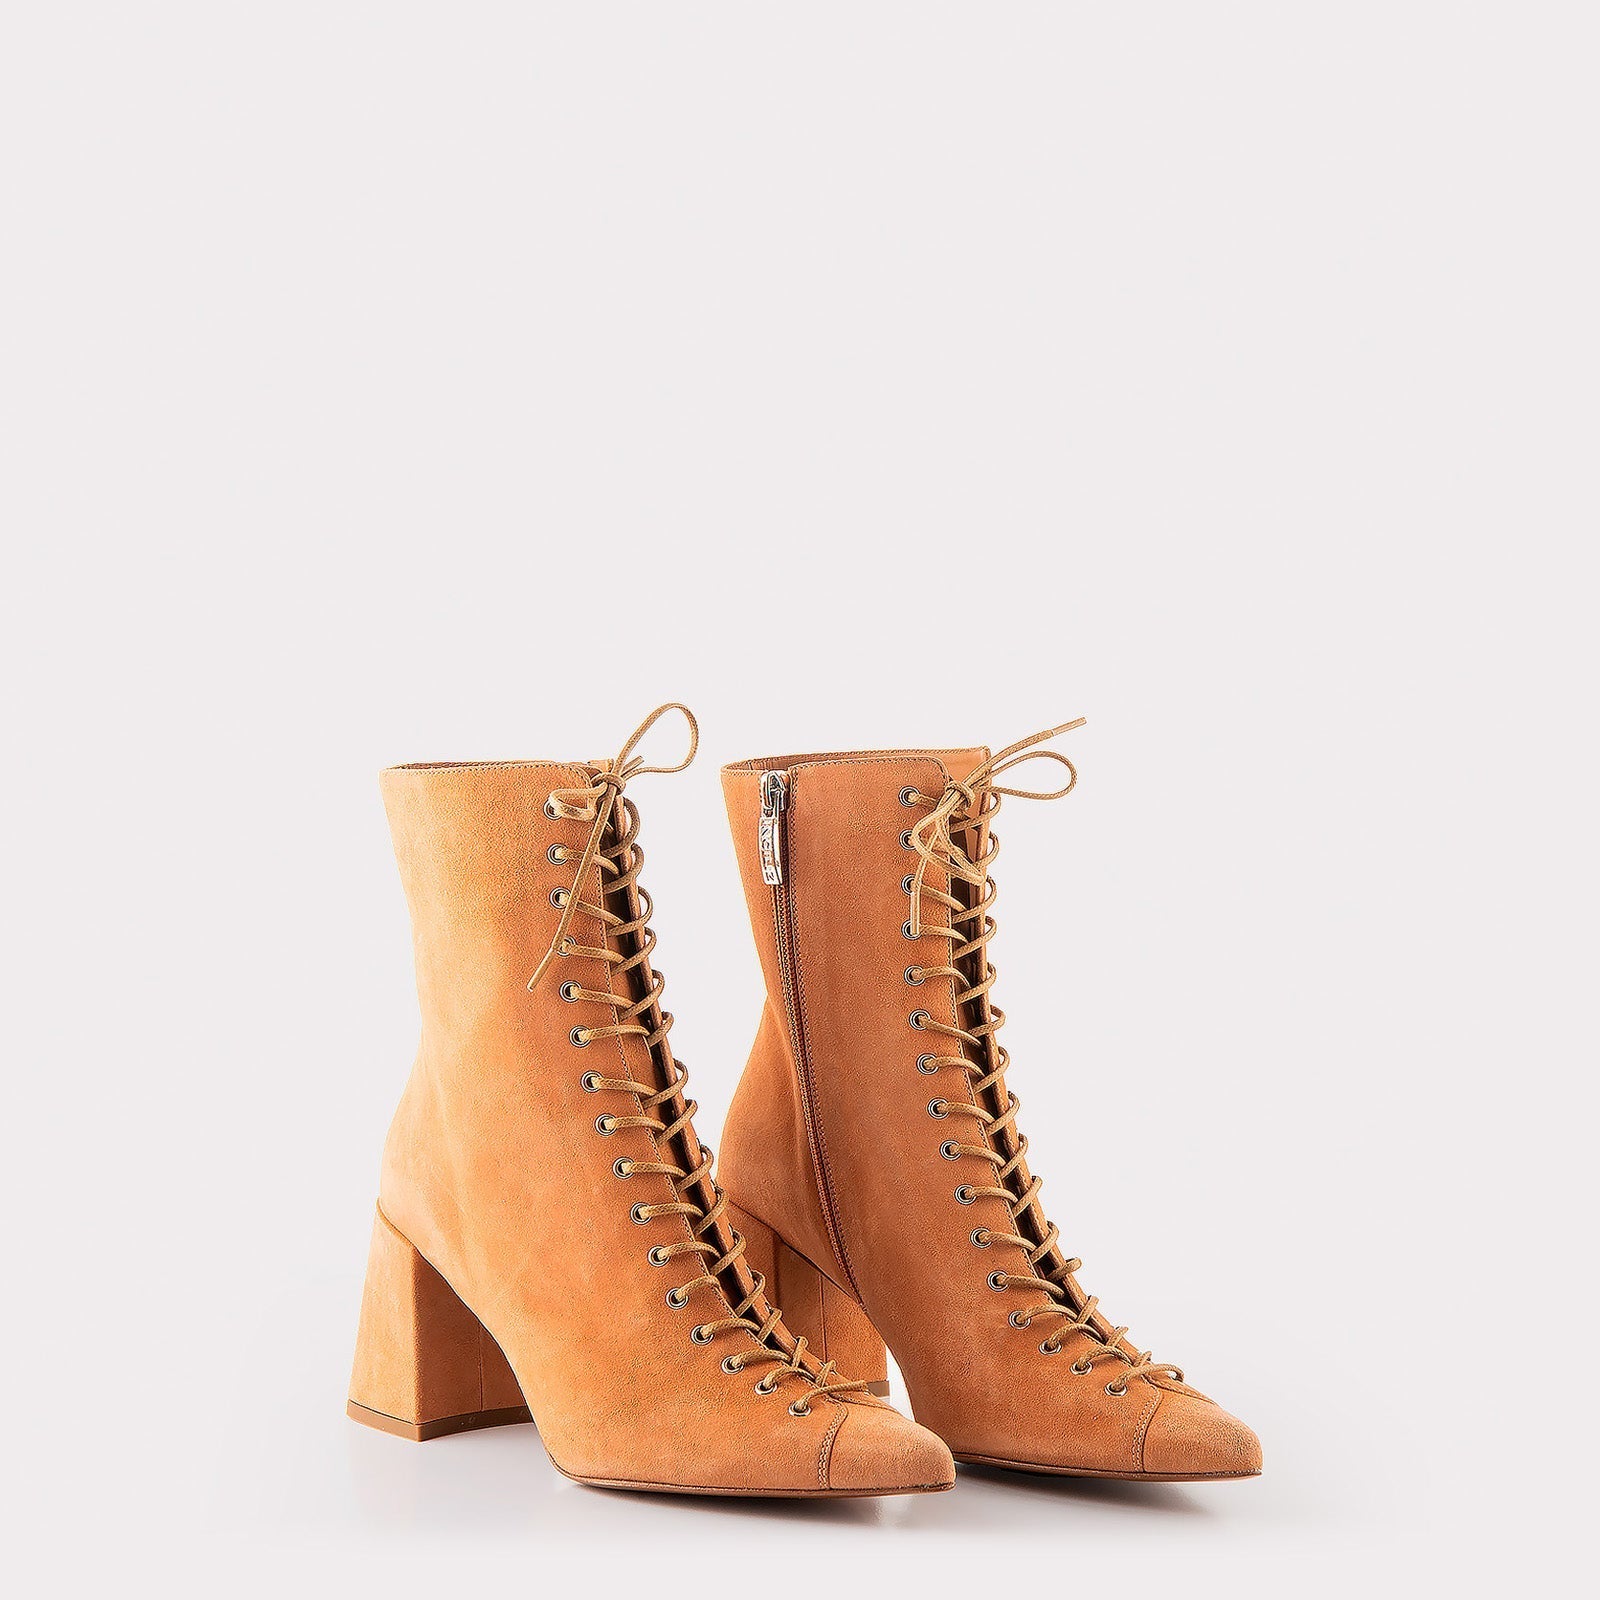 JOLIE 01 NUDE SUEDE LEATHER ANKLE BOOTS